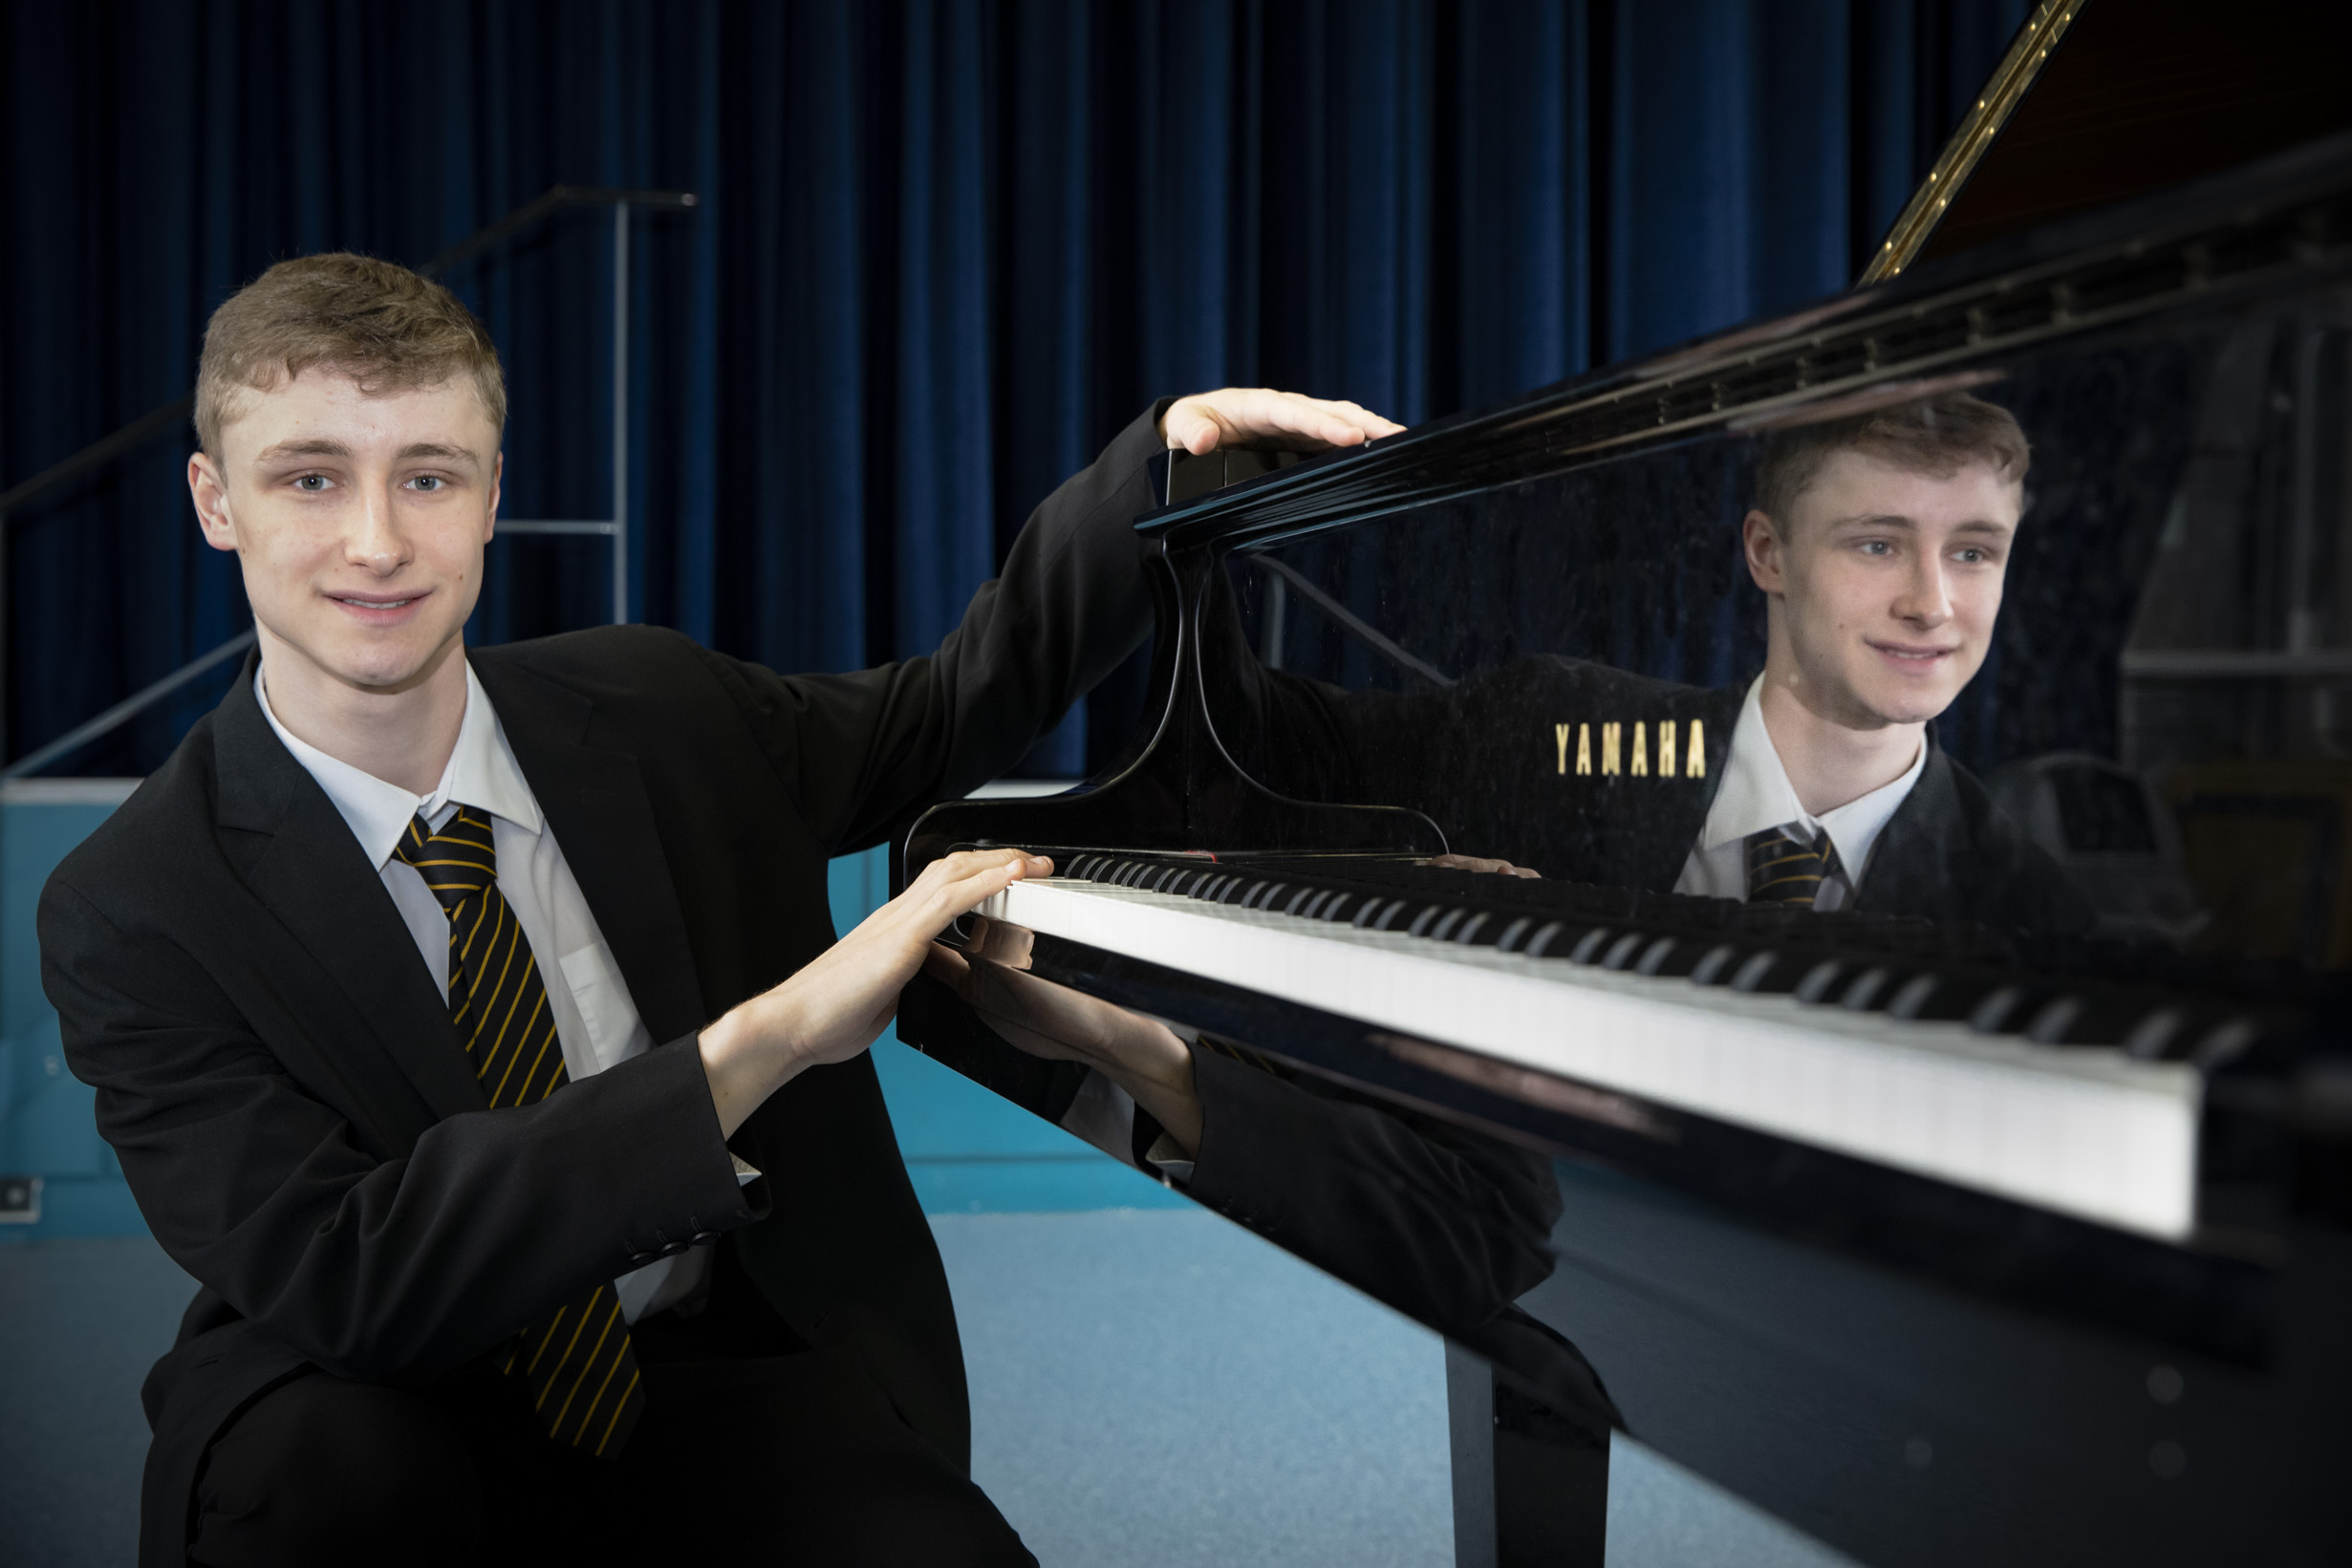 Starring role for young piano virtuoso Ellis at music festival